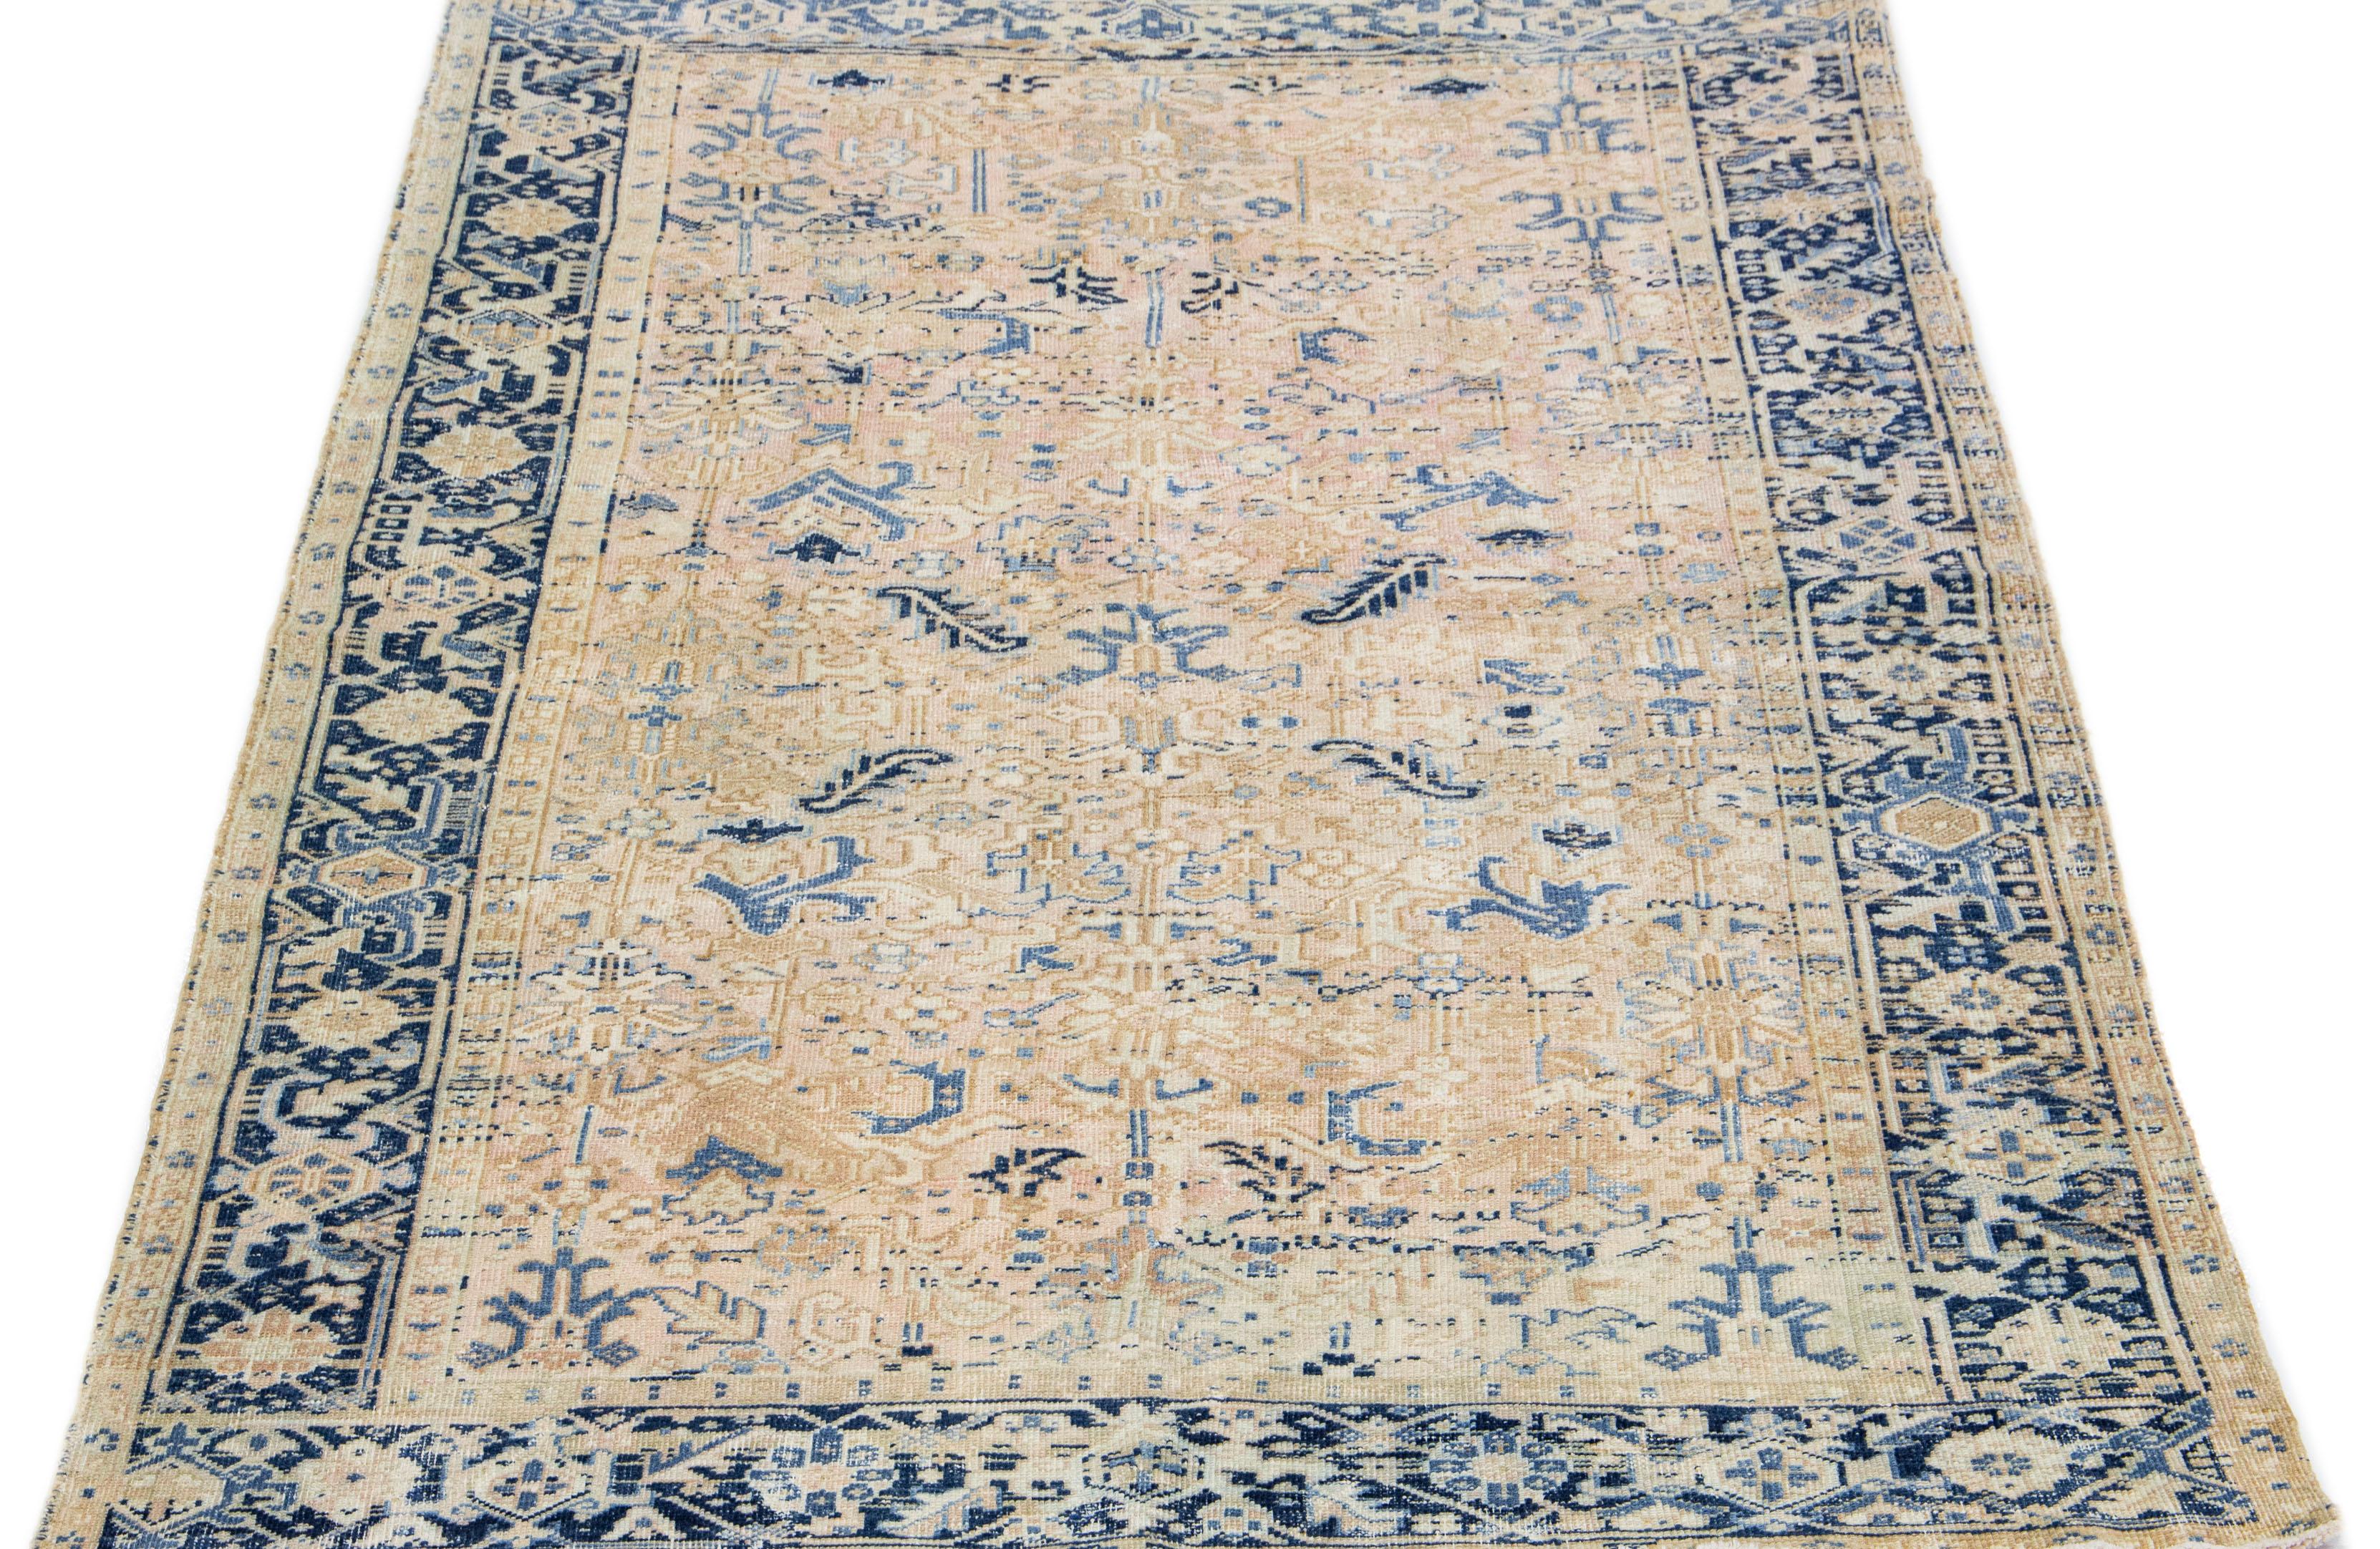 The antique Heriz rug exudes timeless elegance and sophistication with its premium hand knotted wool and striking all-over design. The eye-catching geometric floral pattern in shades of blue and beige adds a touch of allure to the soft peach field,